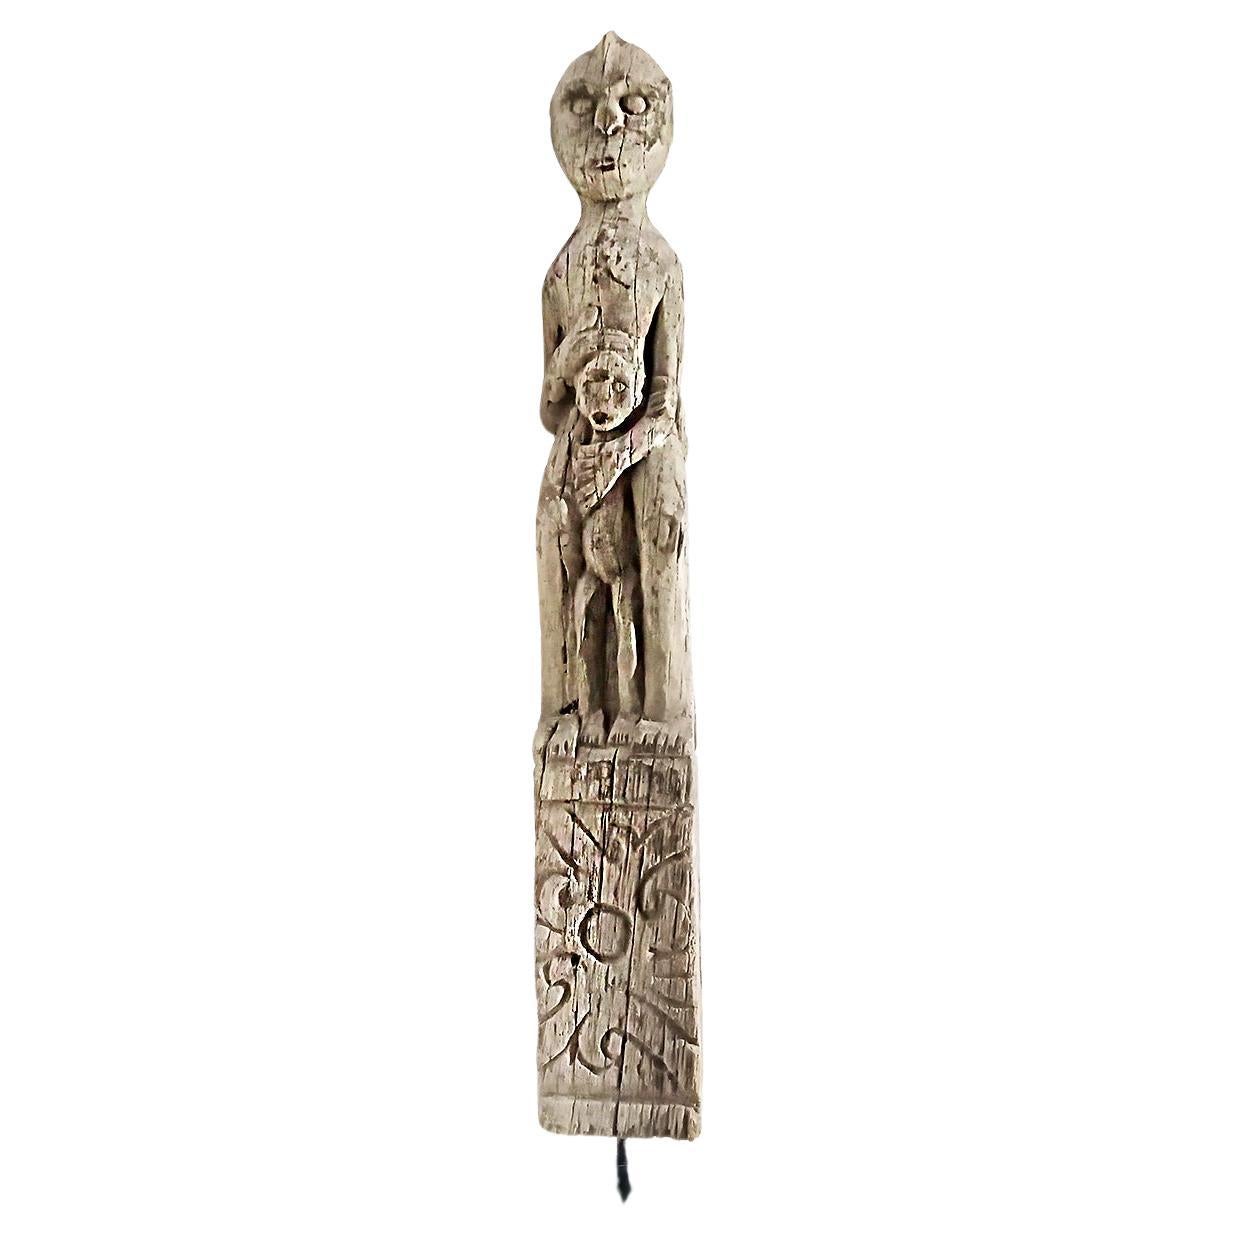 Dayak "Mother and Child" Ironwood Sculpture, Early 20th Century For Sale